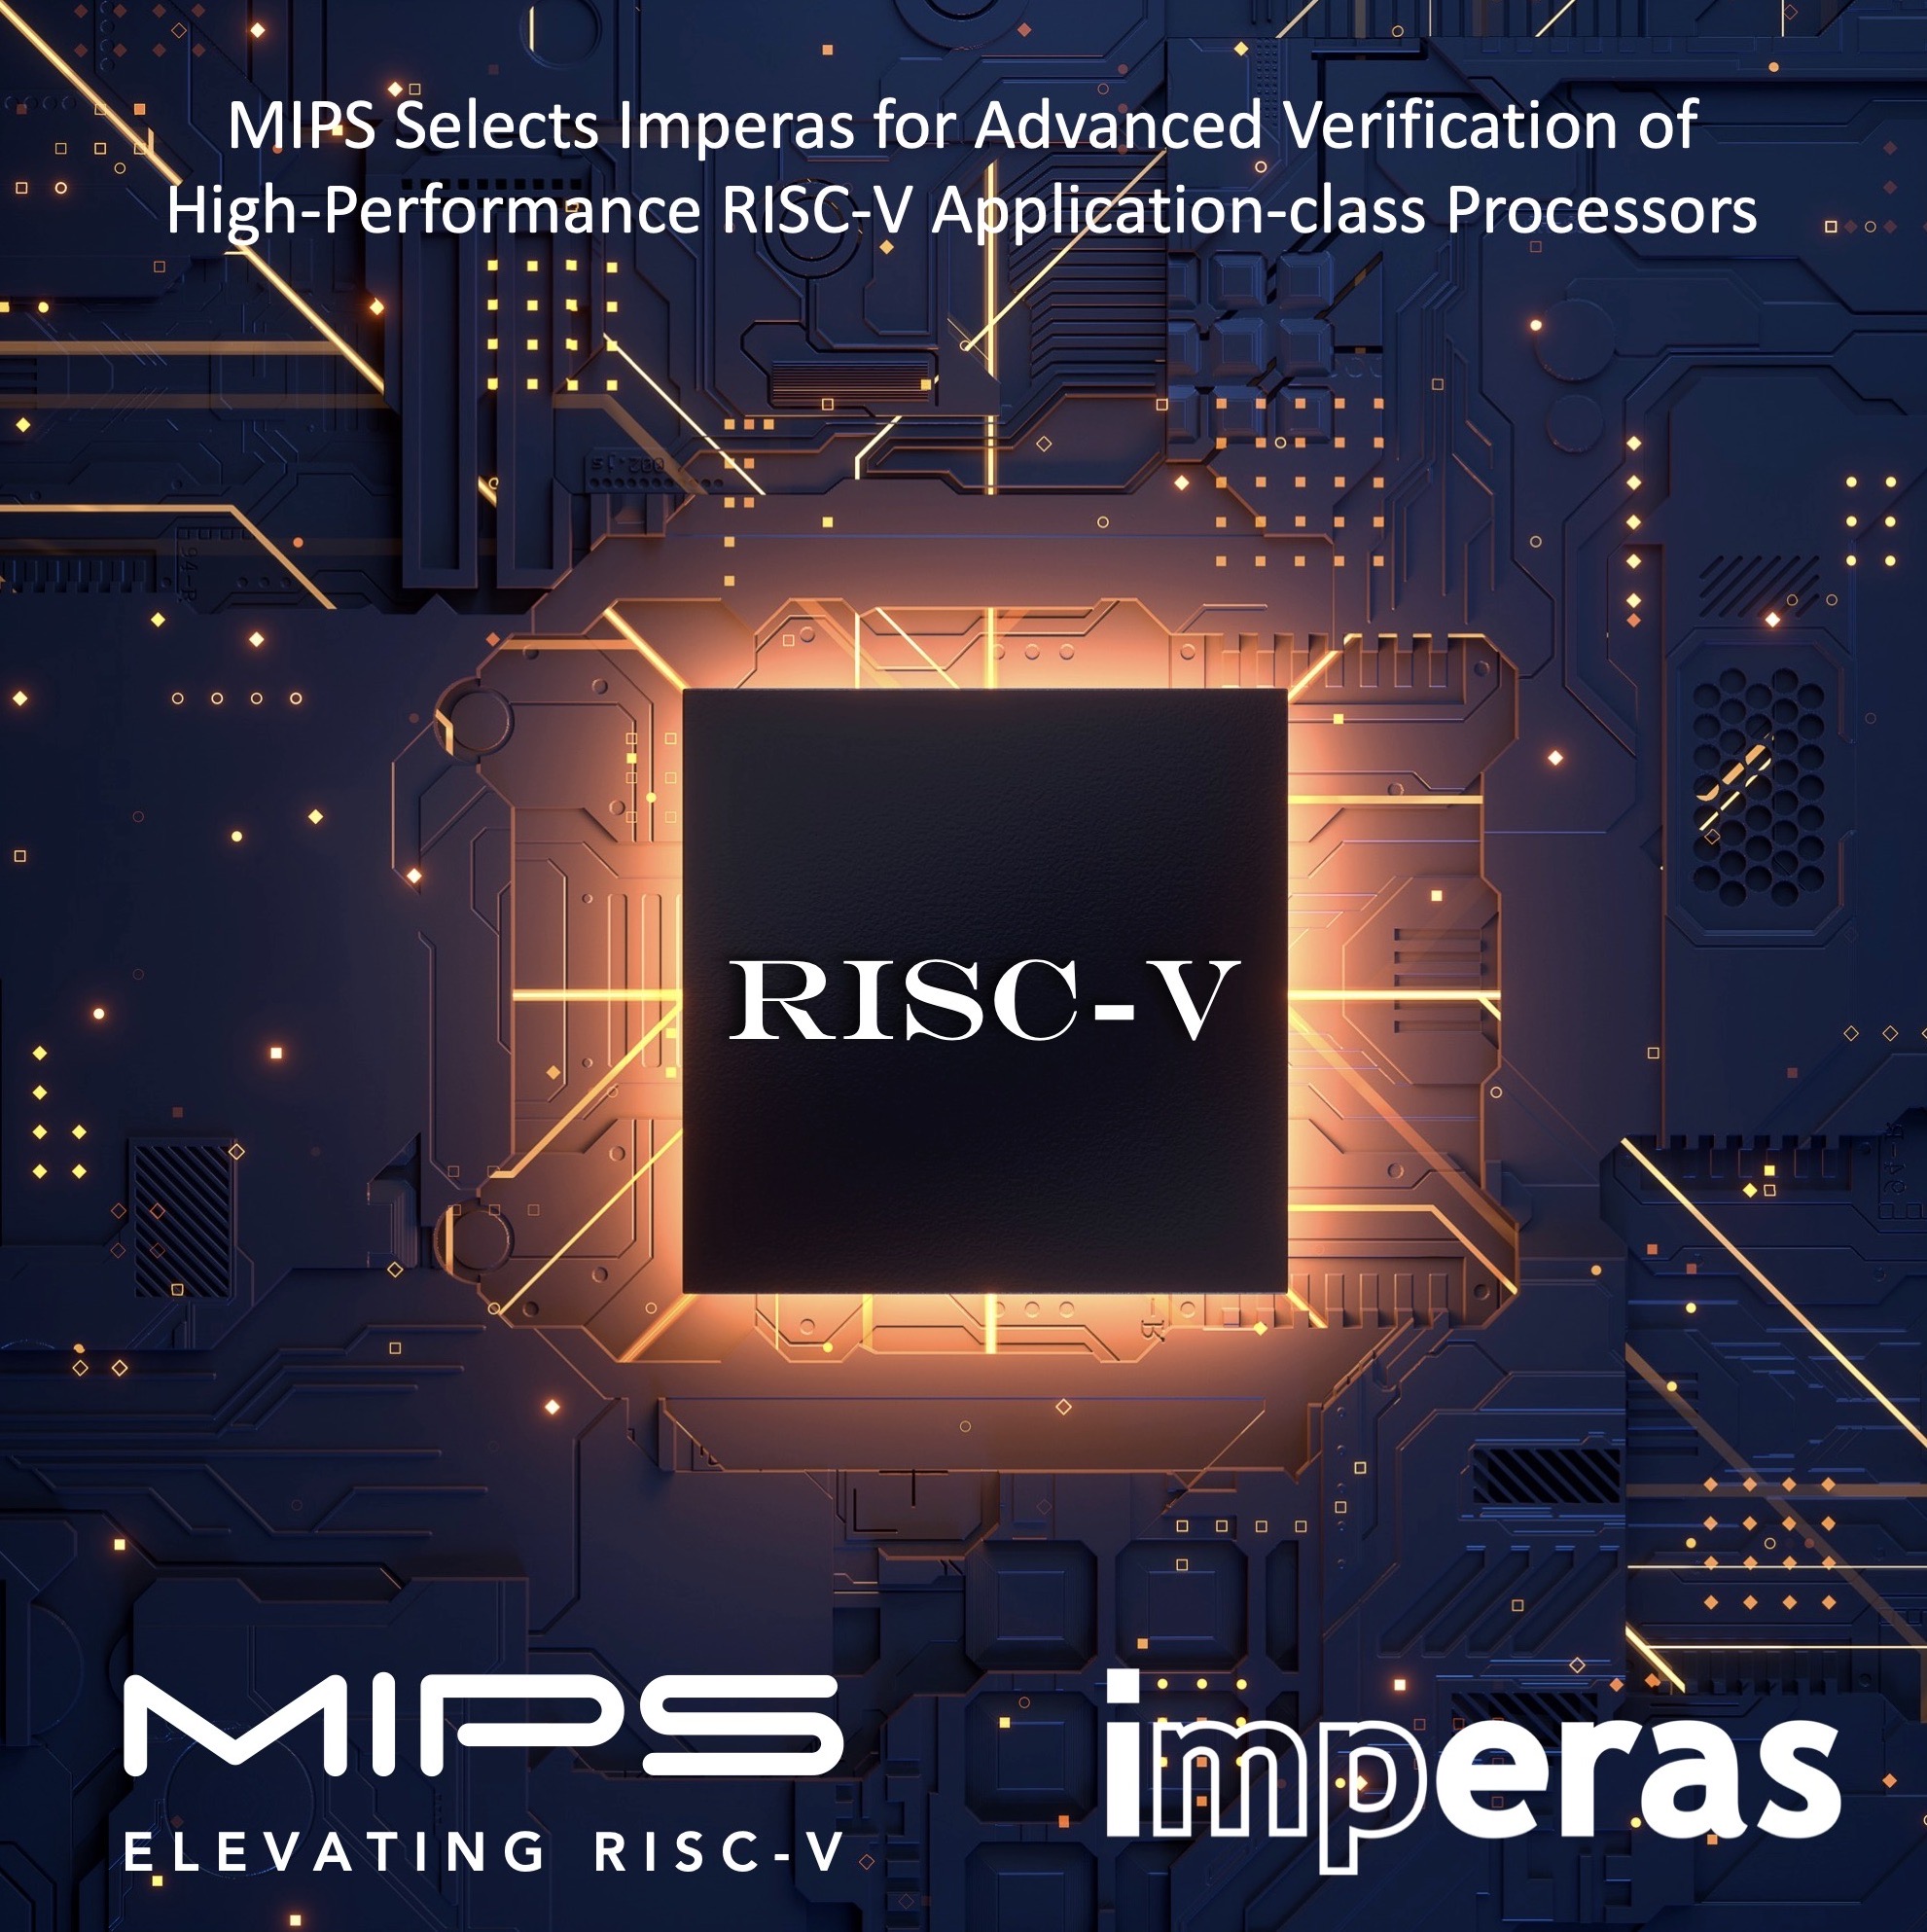 MIPS selects Imperas for advanced RISC-V verification